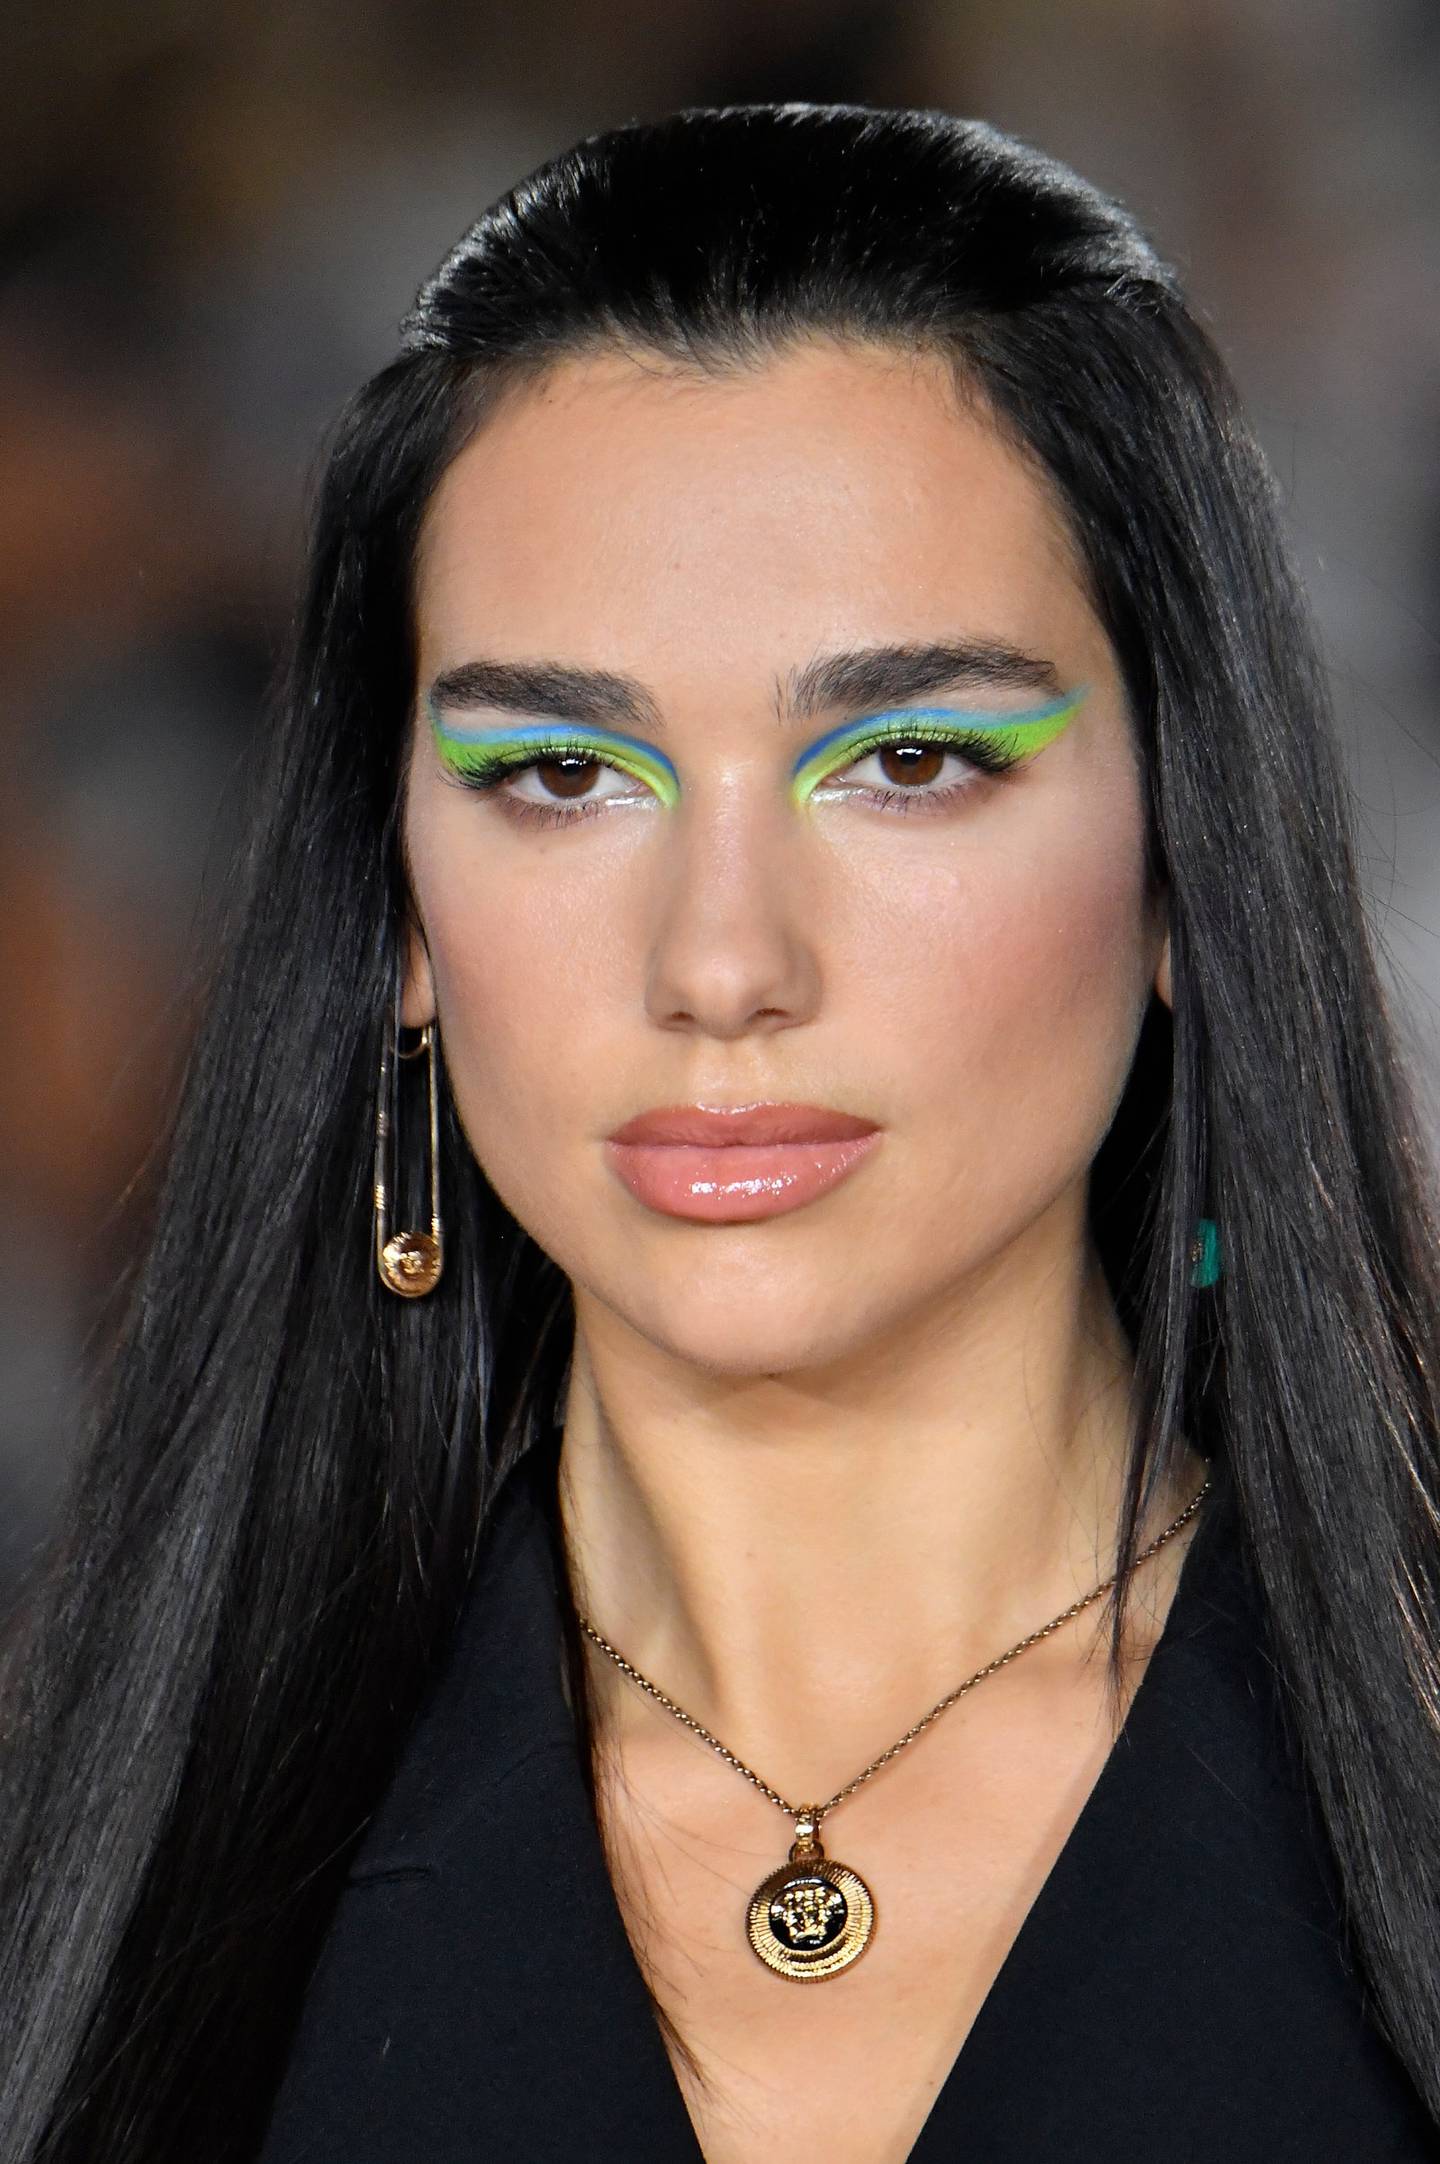 Dua Lipa on the Versace catwalk in brightly coloured eyeliner. Photo Versace